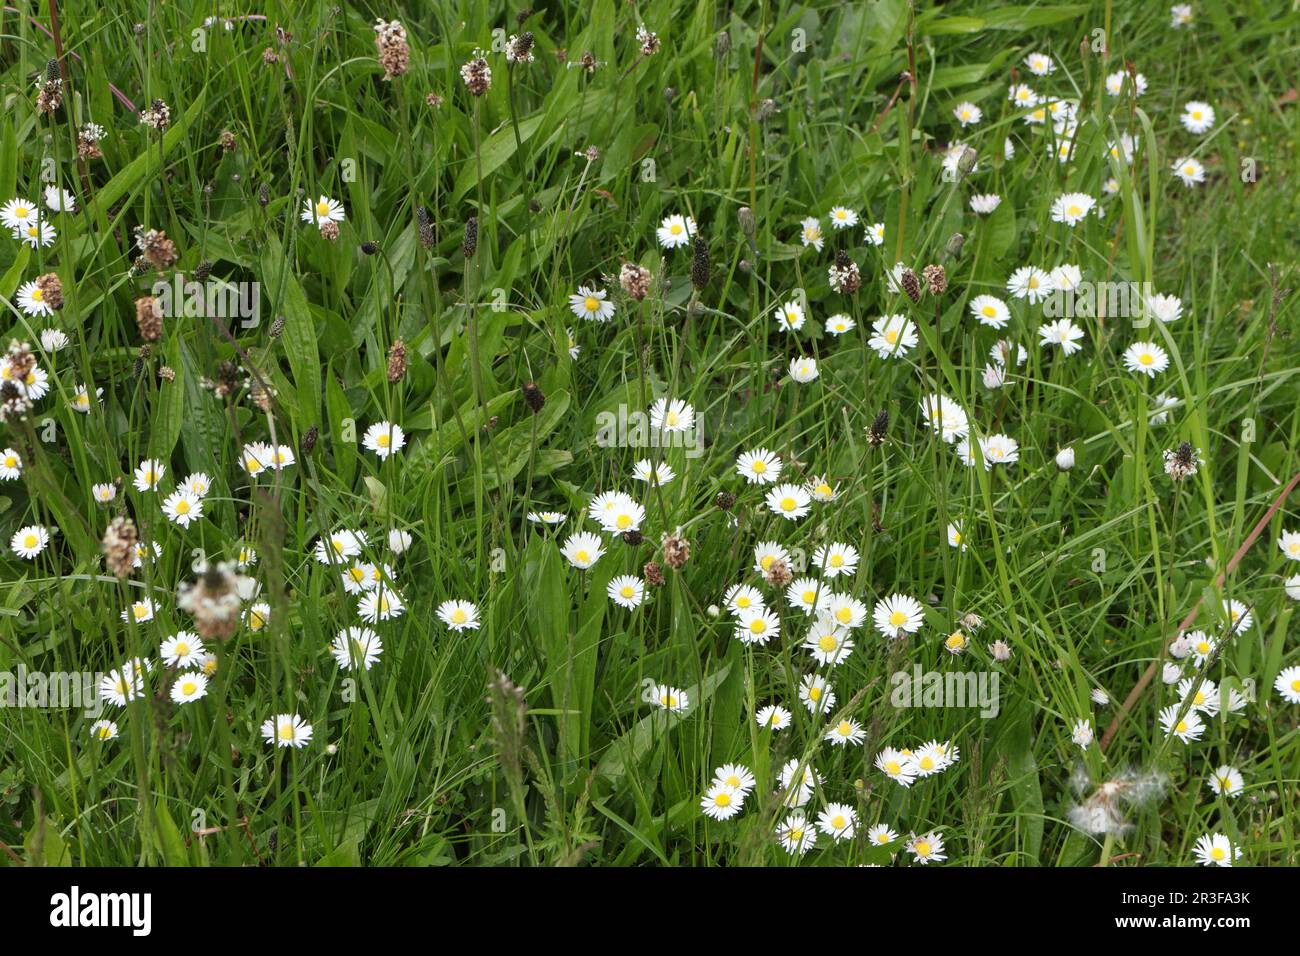 Wild flowers daisies growing in grass, keeping a natural environment and ecosystem Stock Photo